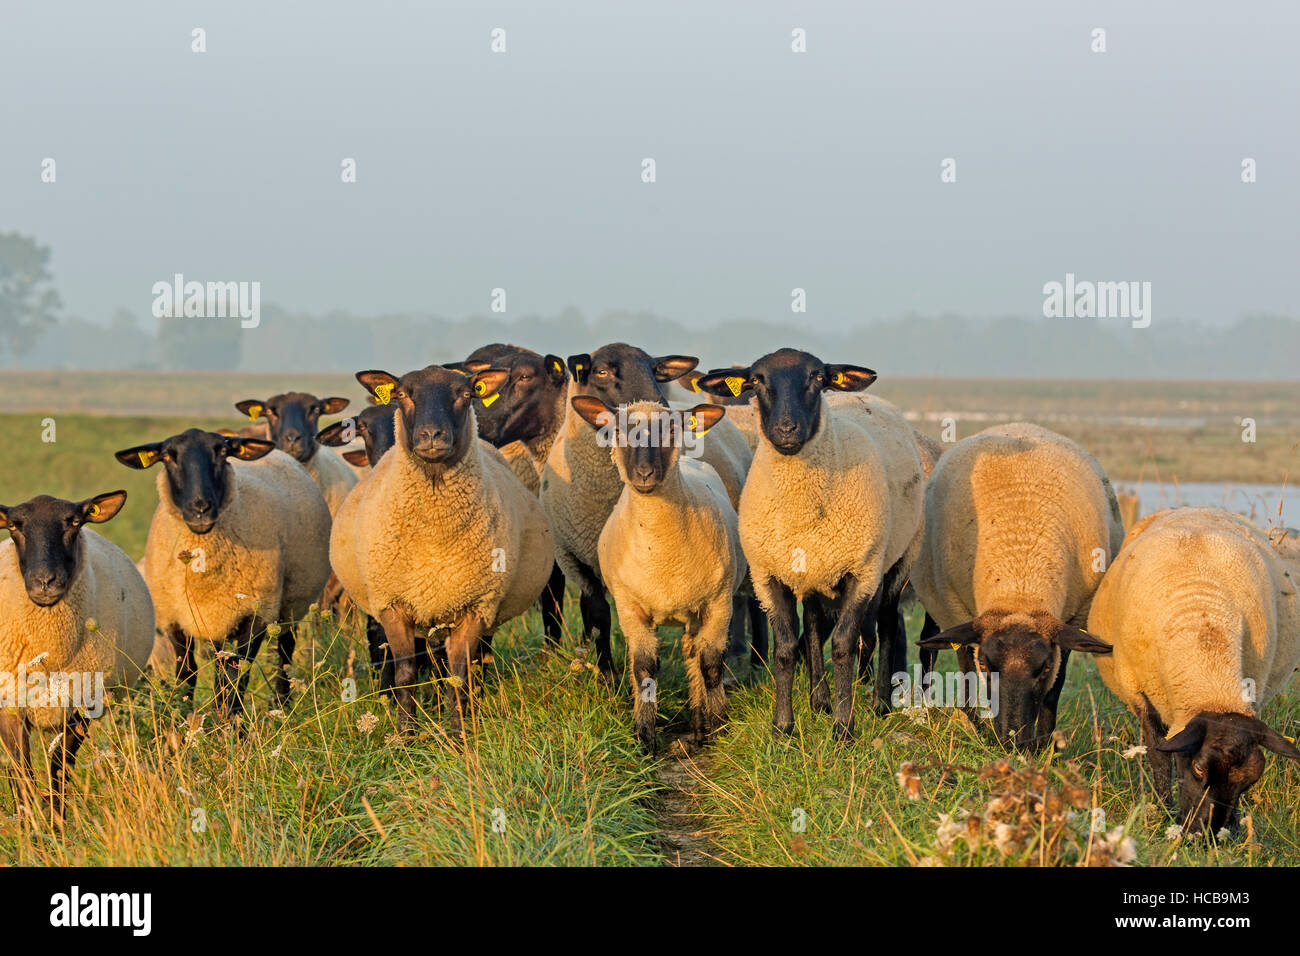 Black headed sheep (Ovis orientalis aries) herd looking curiously, Brittany, France Stock Photo